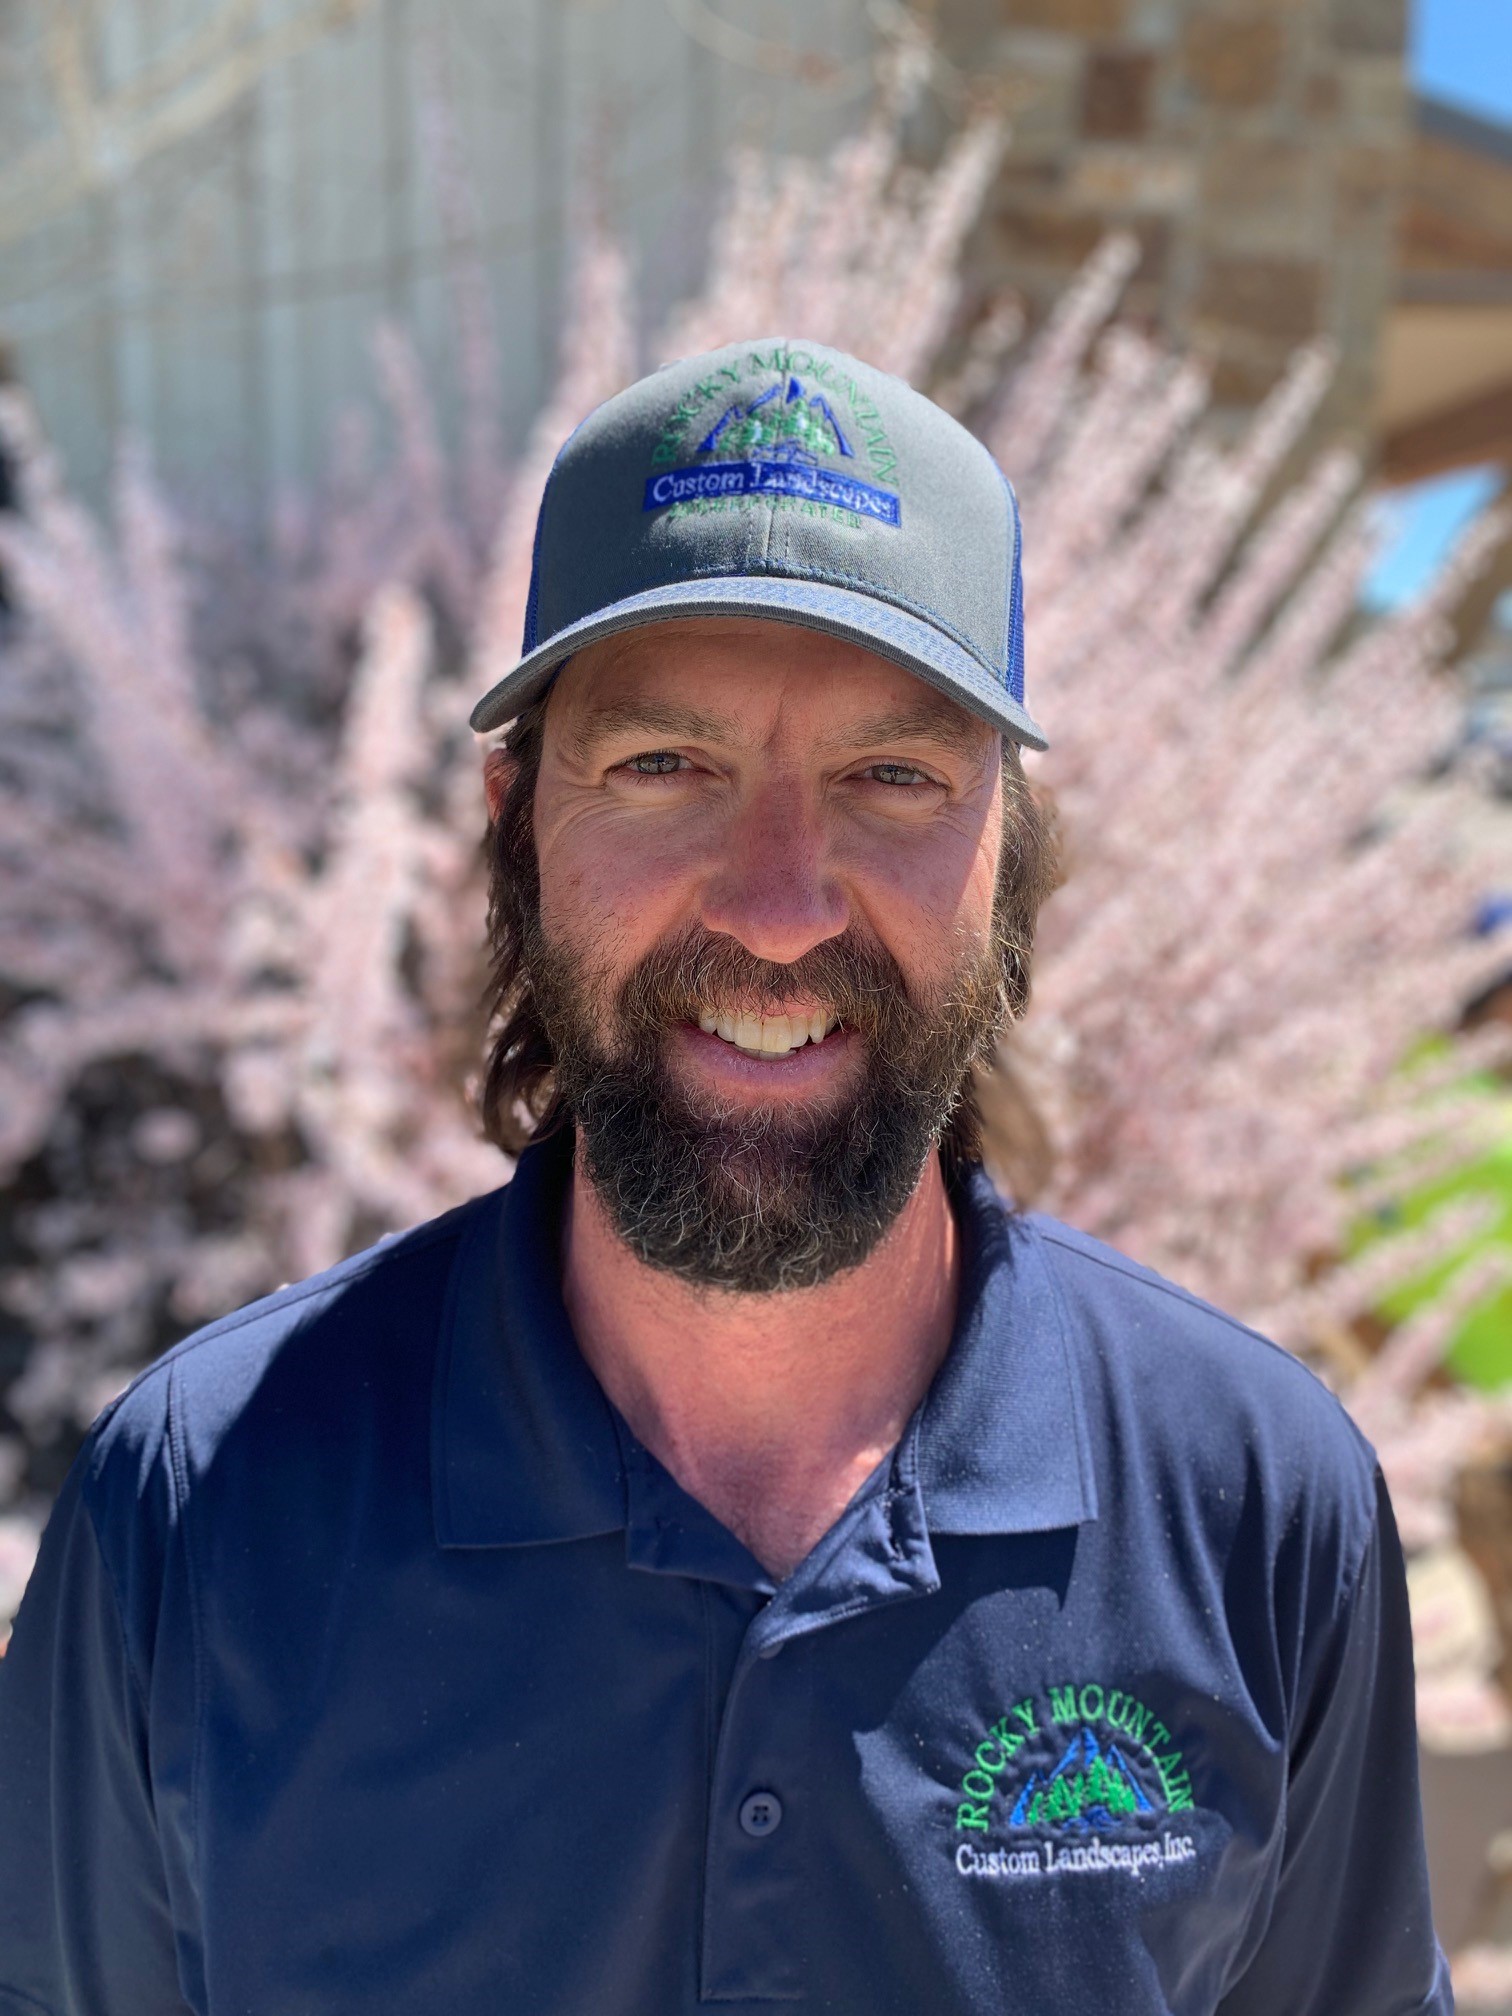 A smiling person with a beard wears a cap and a dark polo shirt embroidered with "Rocky Mountain Custom Landscape Inc." with flowering shrubs in the background.